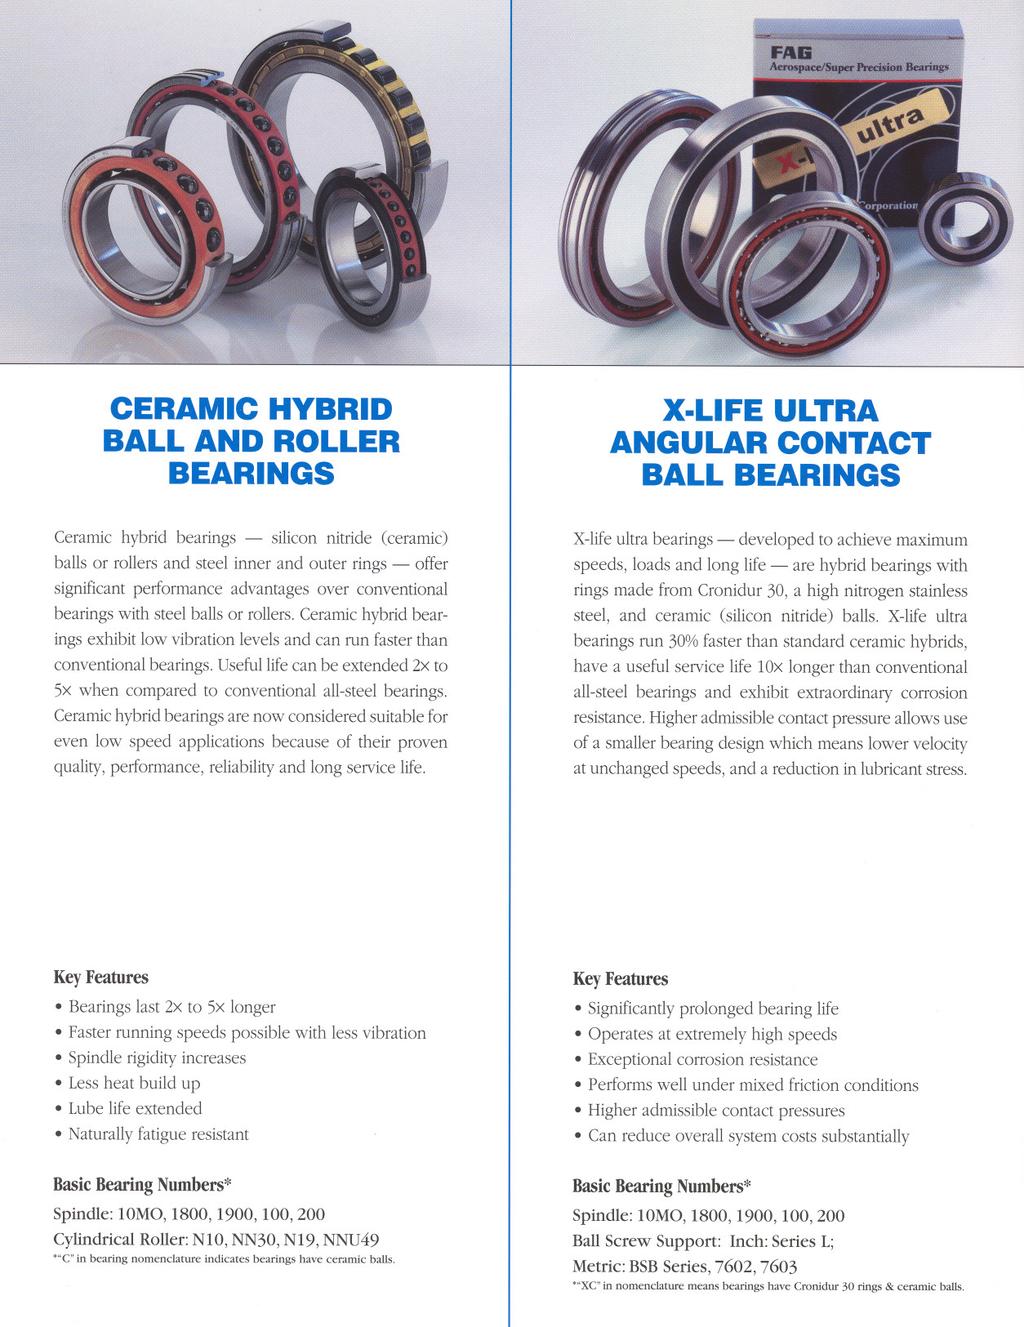 CERAMIC HYBRID BALL AND ROLLER BEARINGS X-LIFE ULTRA ANGULAR CONTACT BALL BEARINGS Ceramic hybrid bearings - silicon nitride (ceramic) balls or rollers and steel inner and outer rings - offer